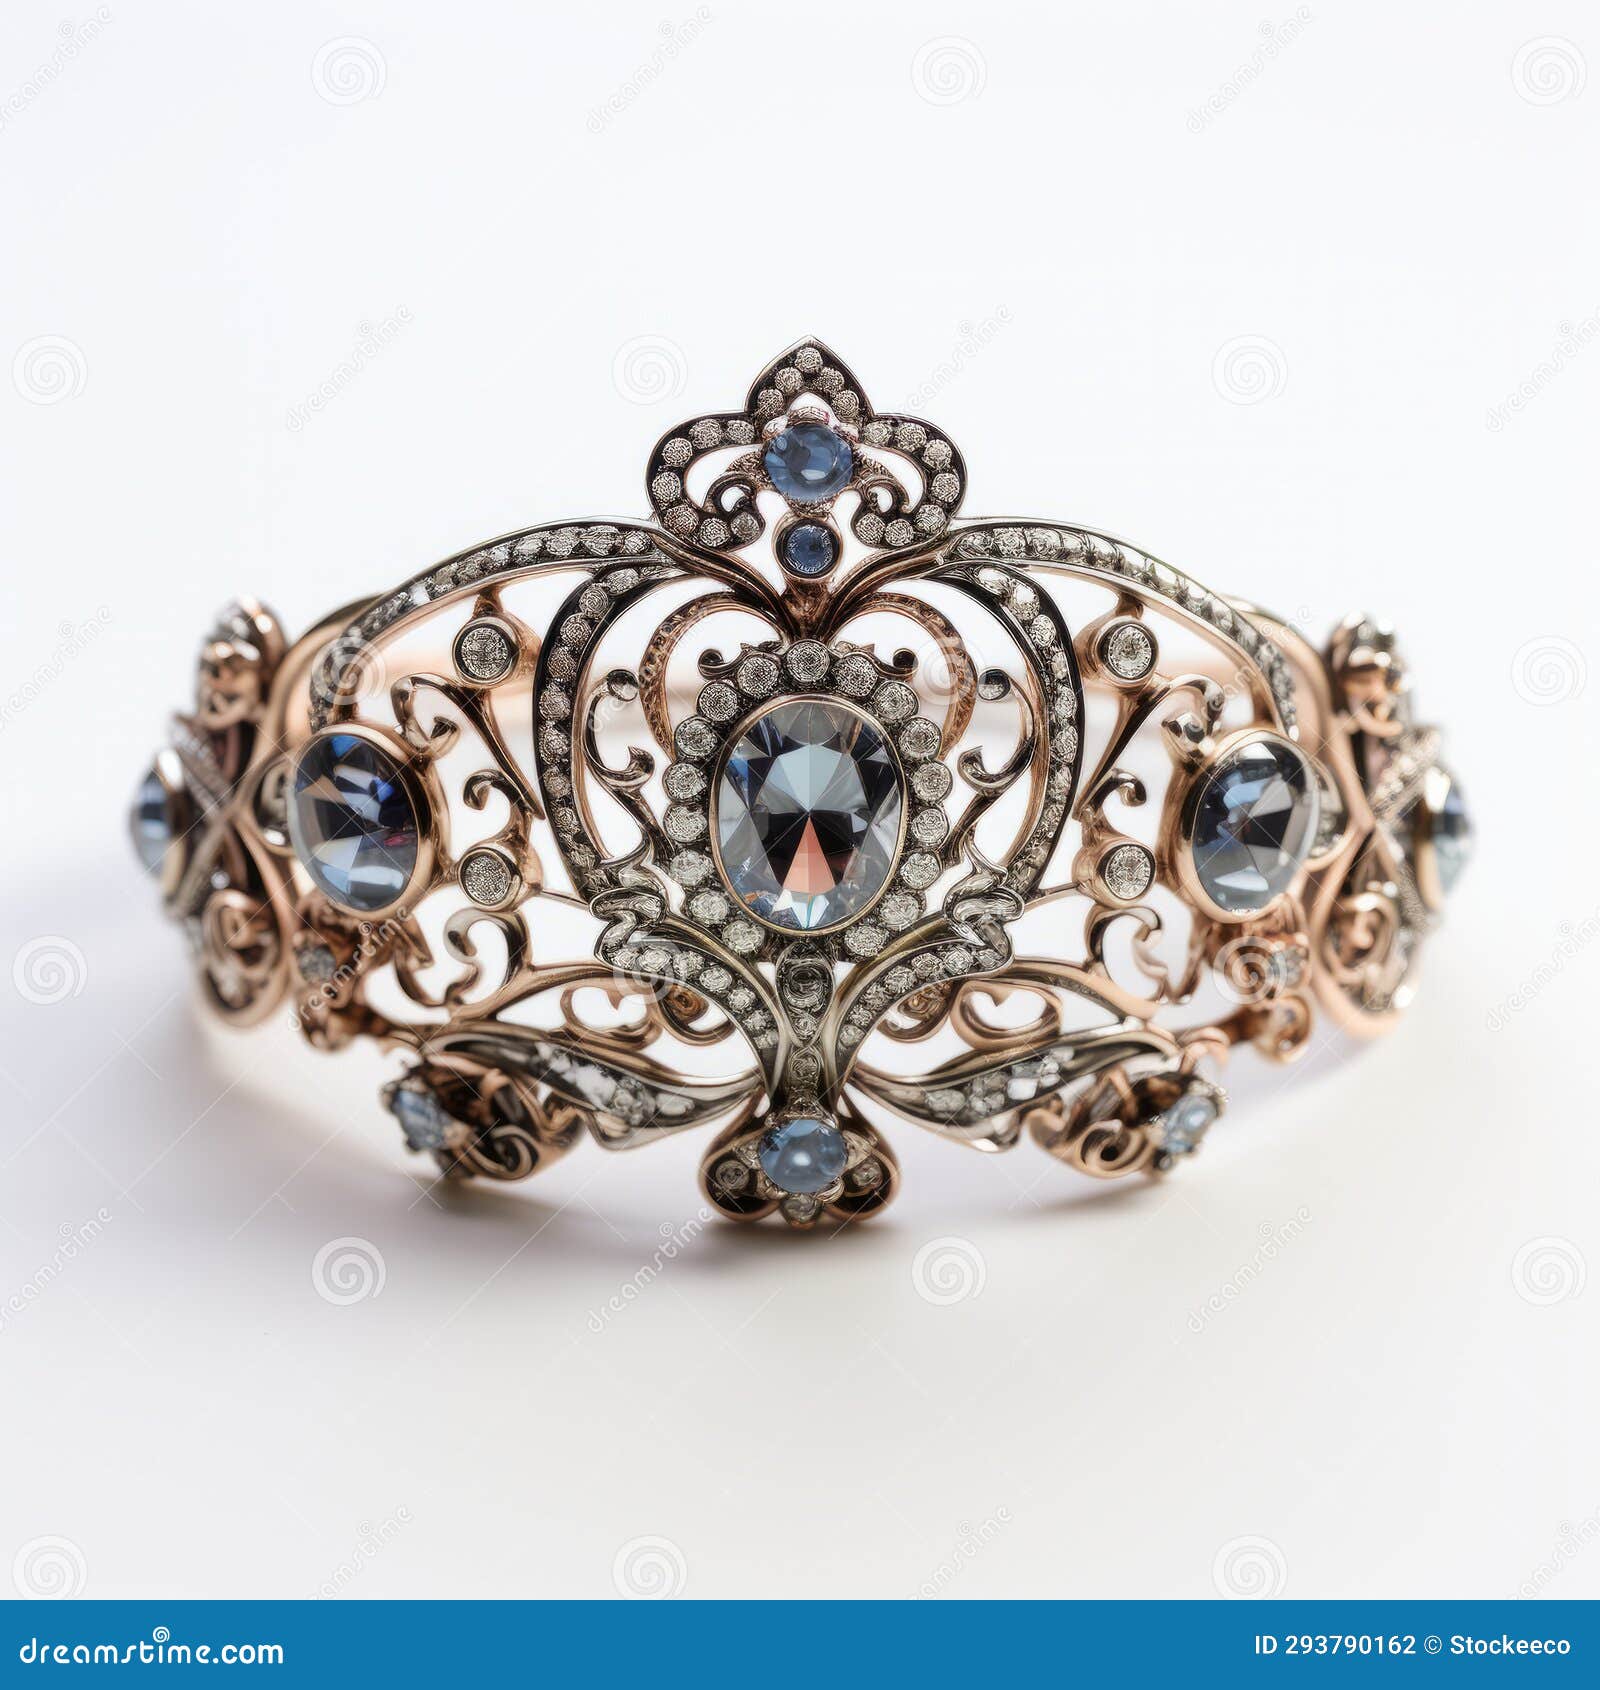 vintage tiara with blue stones and diamonds - inspired by queen